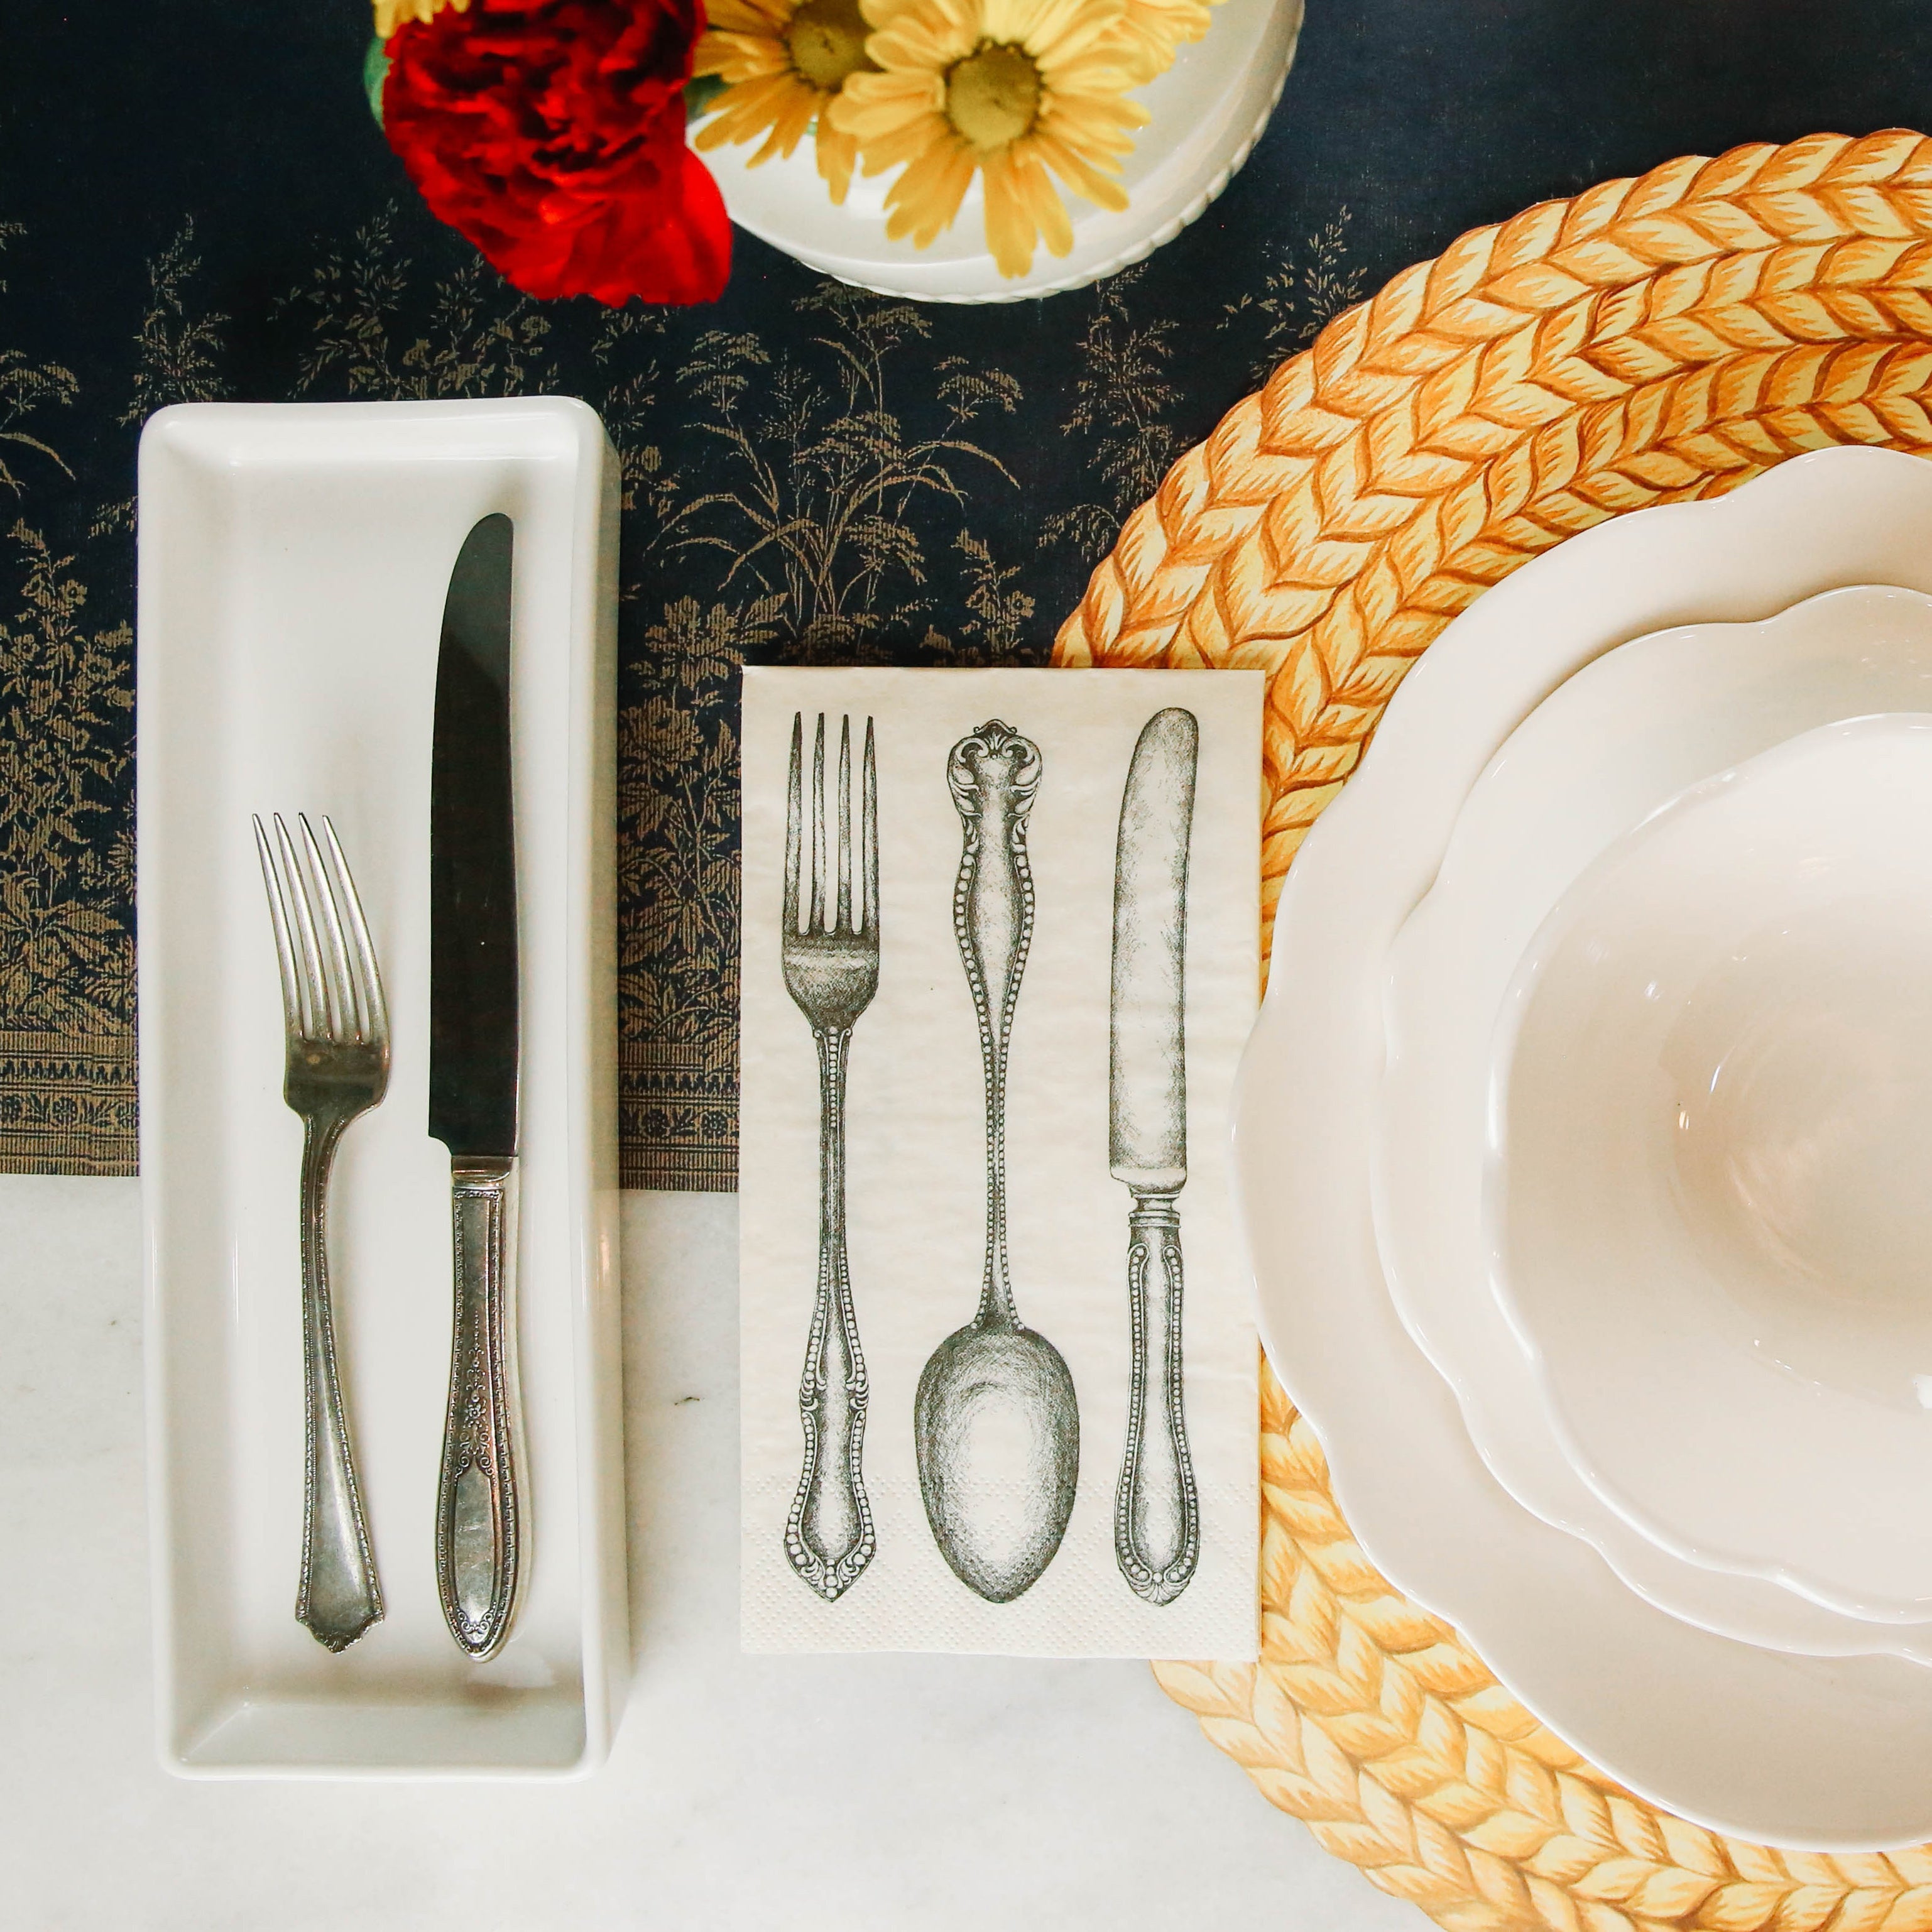 An elegant place setting featuring a Classic Cutlery Guest Napkin next to the plate.